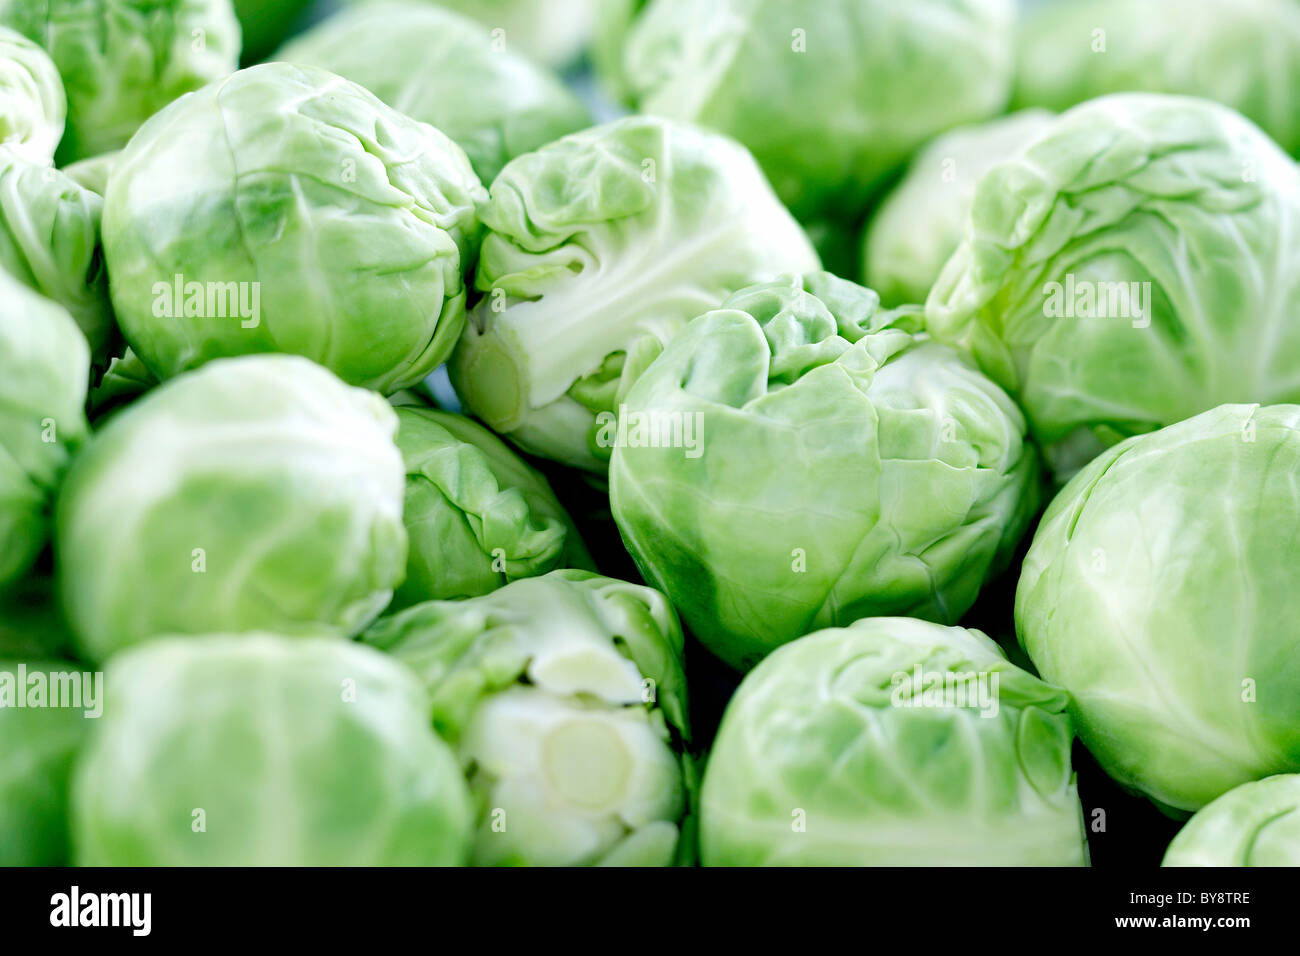 Brussel Sprouts full frame Stock Photo